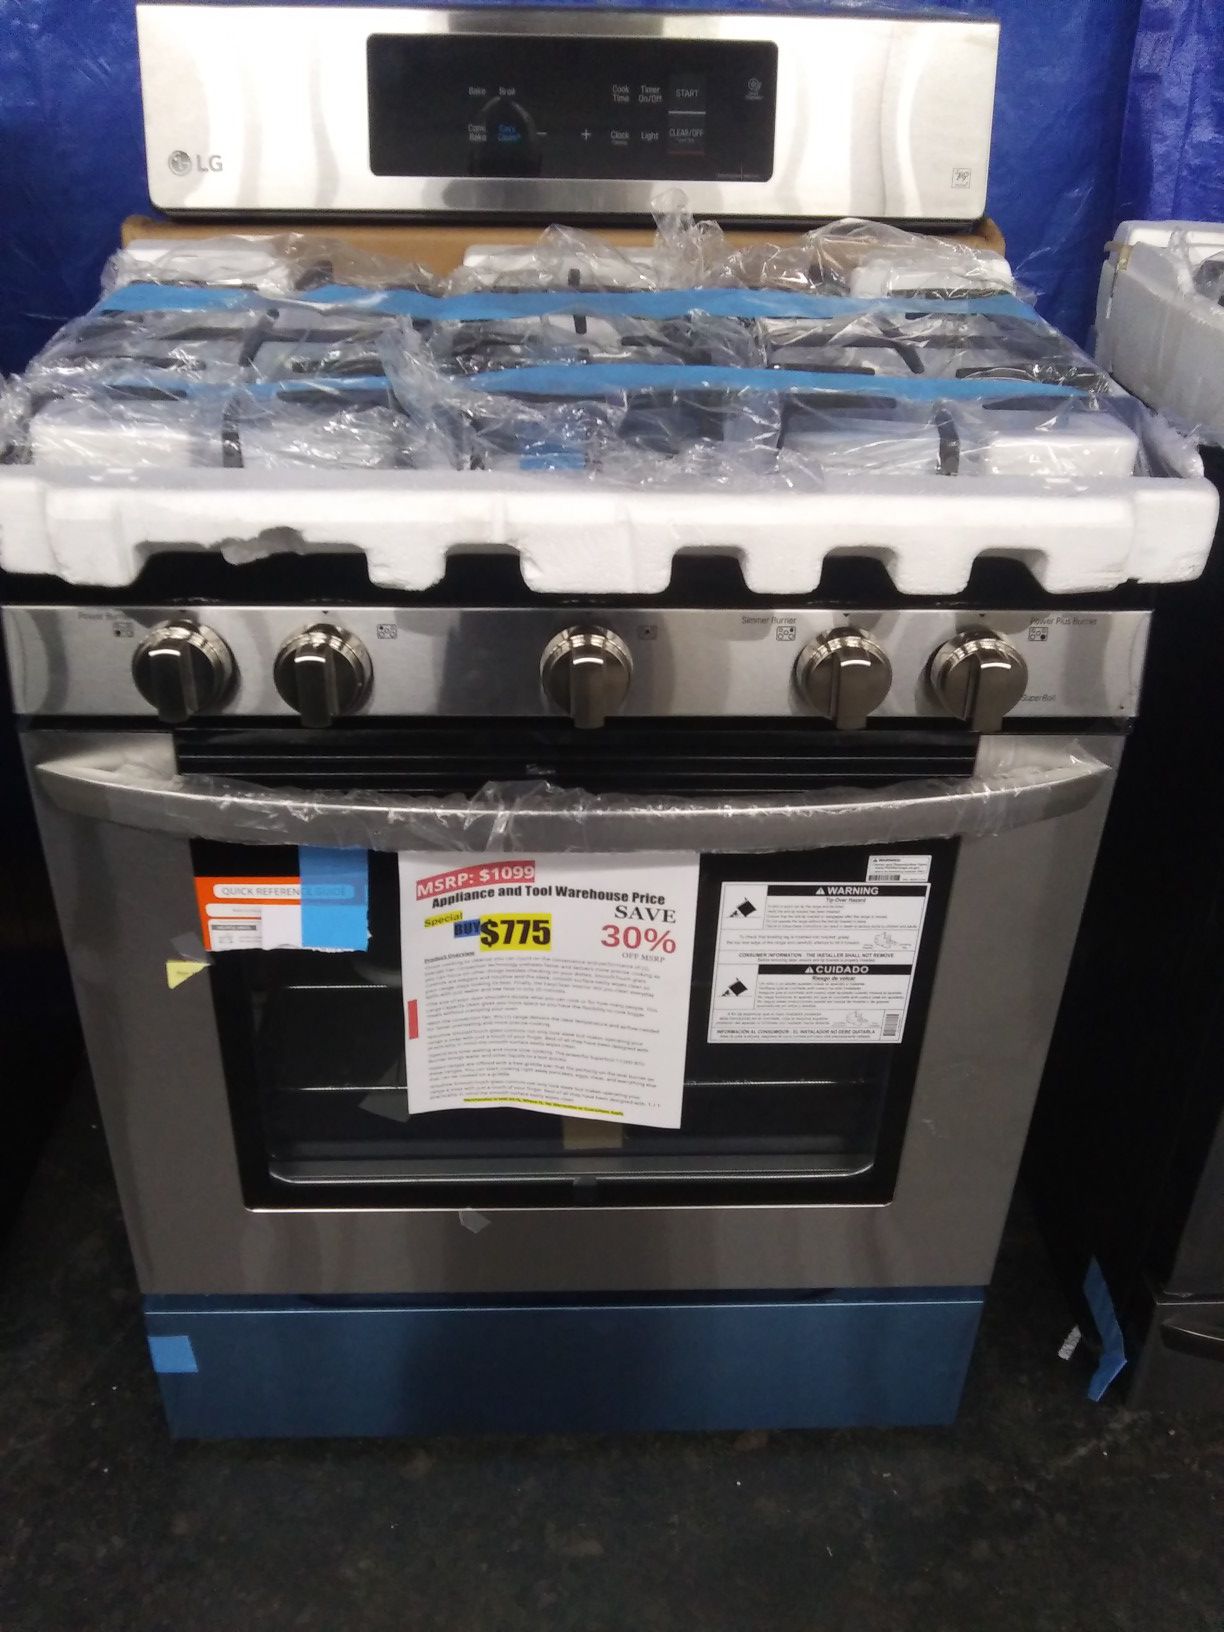 NEW scratch and dent LG 5.4 cu. ft. Gas Range with Even Jet Fan Convection Oven in Stainless Steel